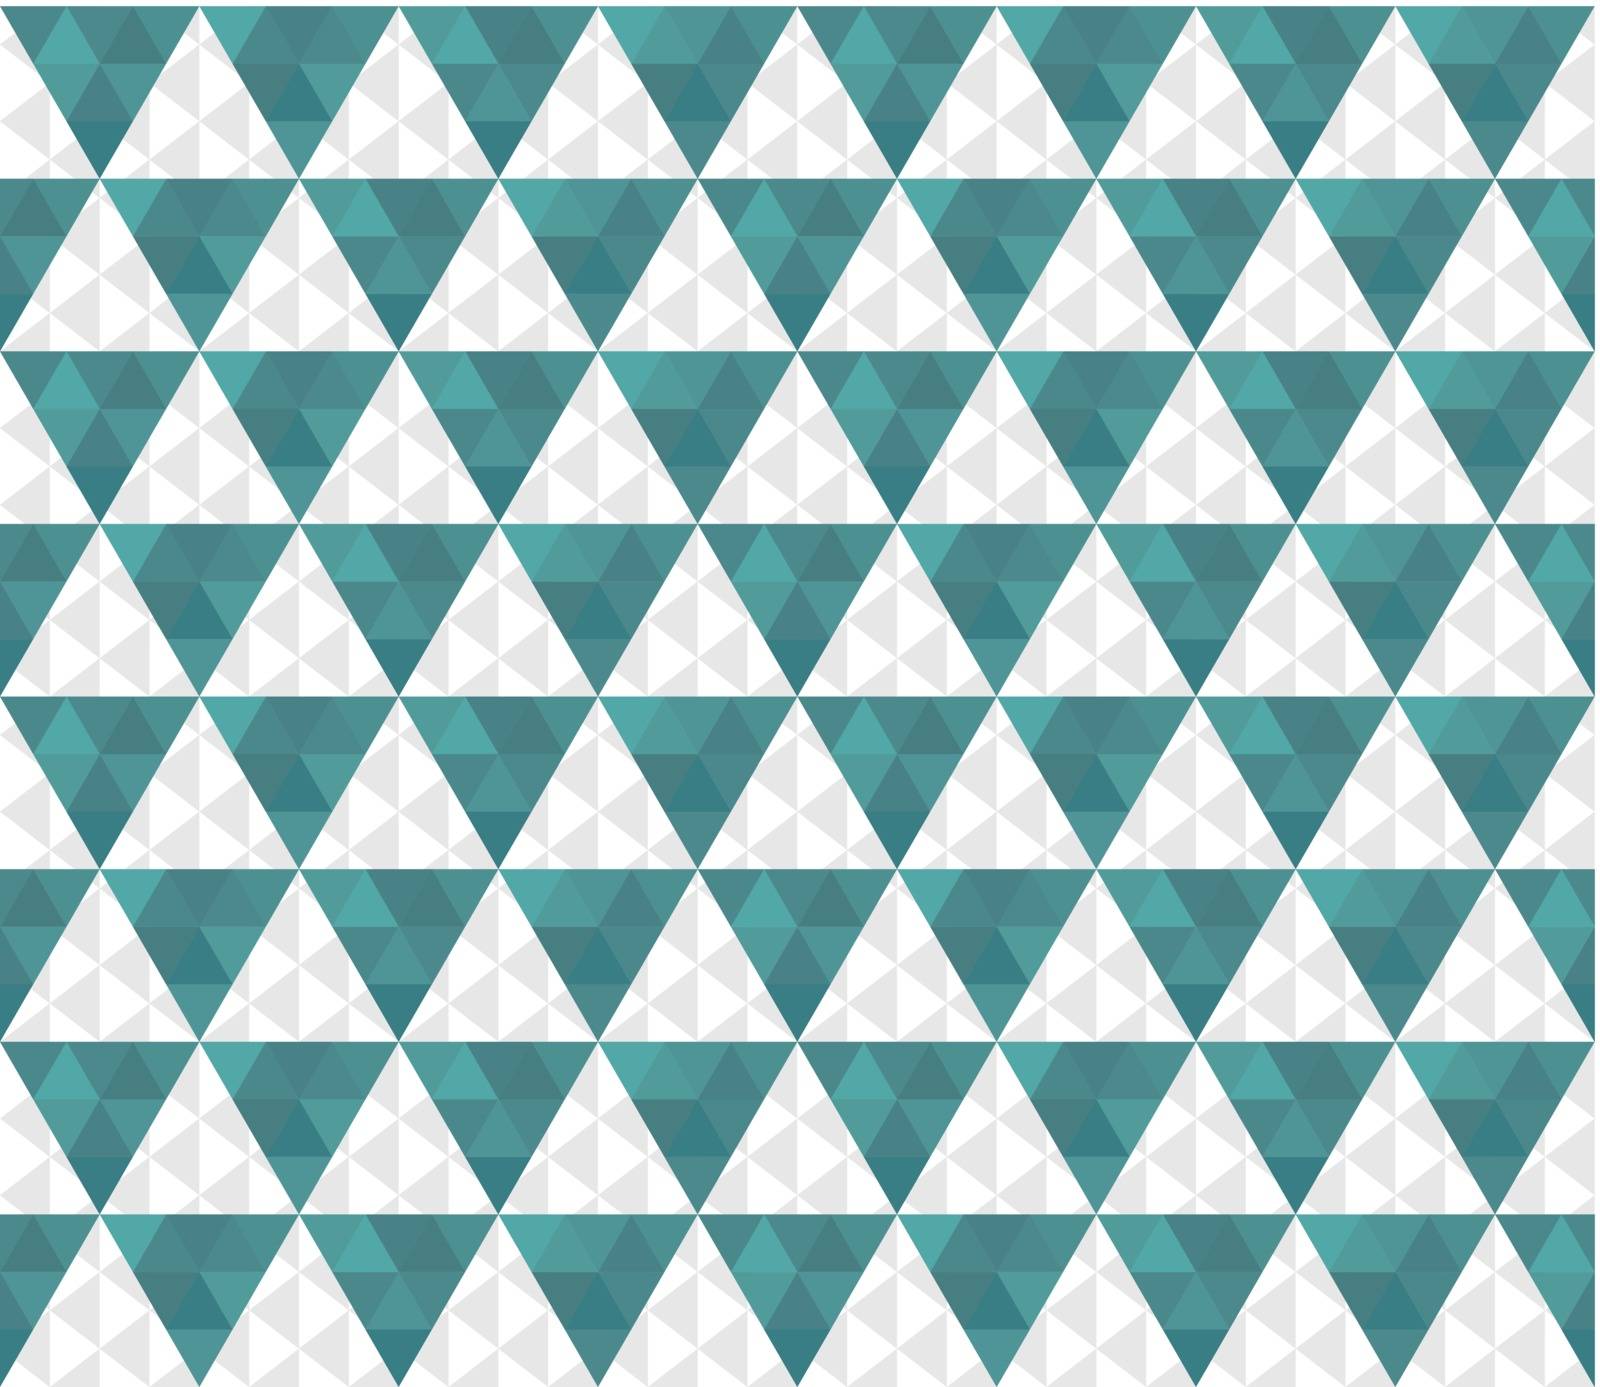 Triangle pattern background, triangle background by LittleCuckoo